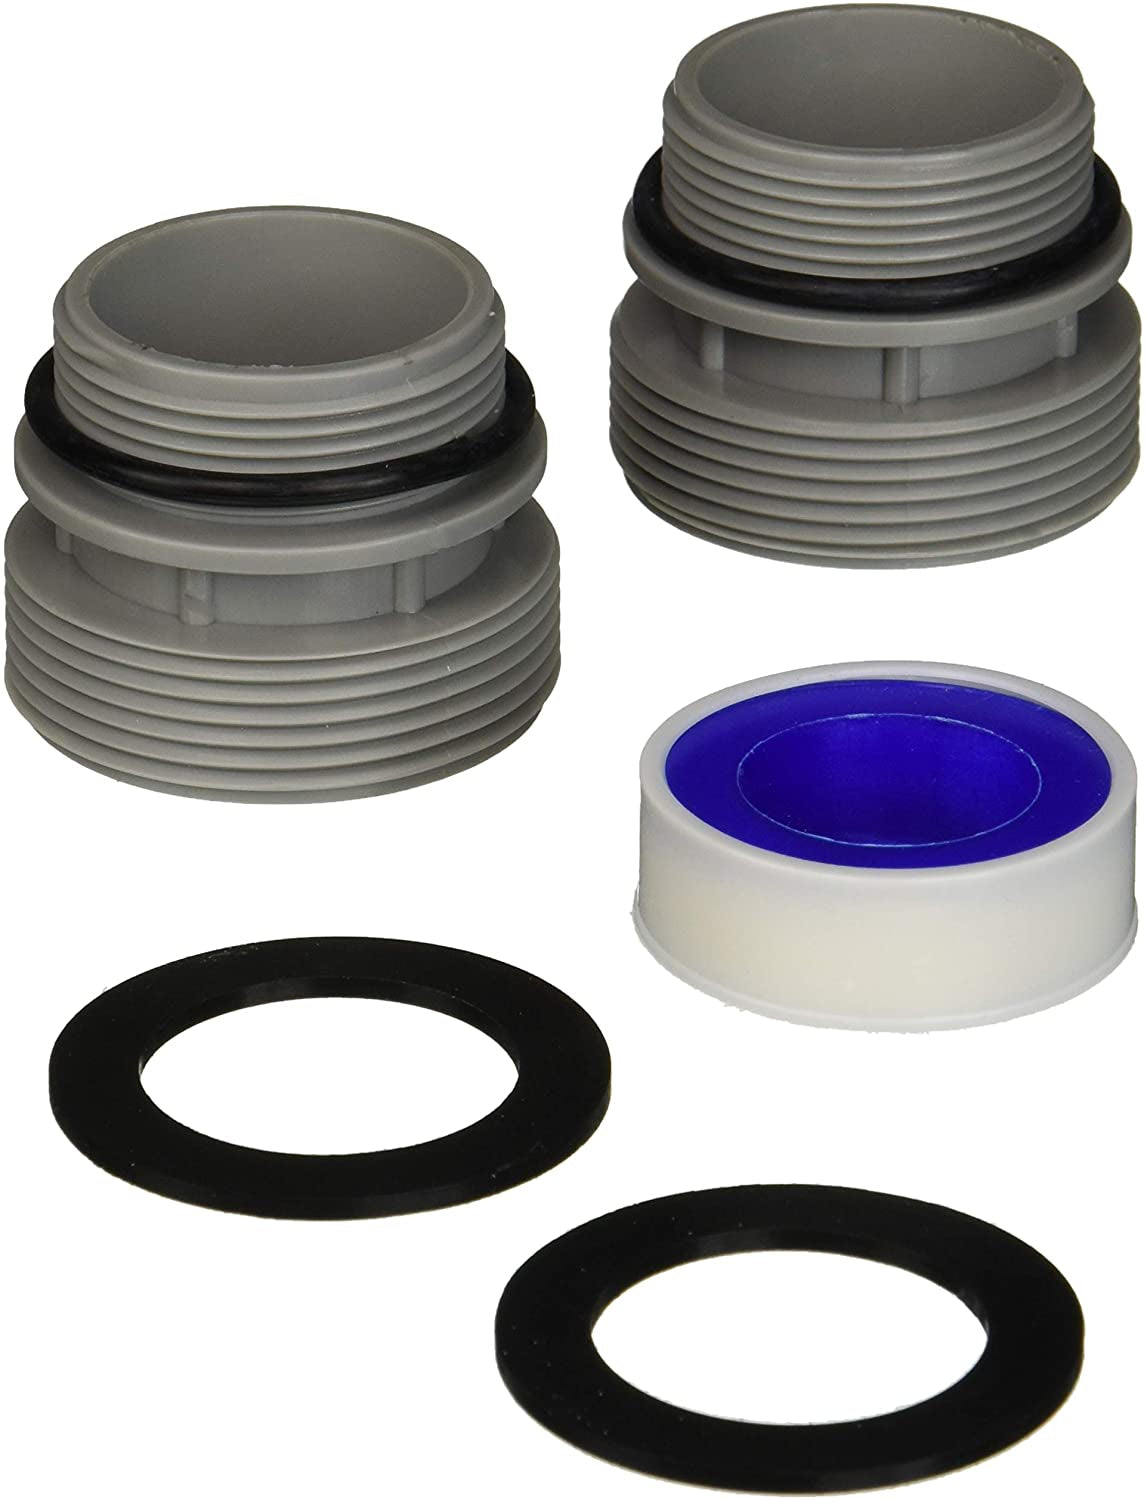 GAME, GAME 4560 40Mm to 1 1/2 Inch Conversion Kit (For Intex & Bestway Pools)